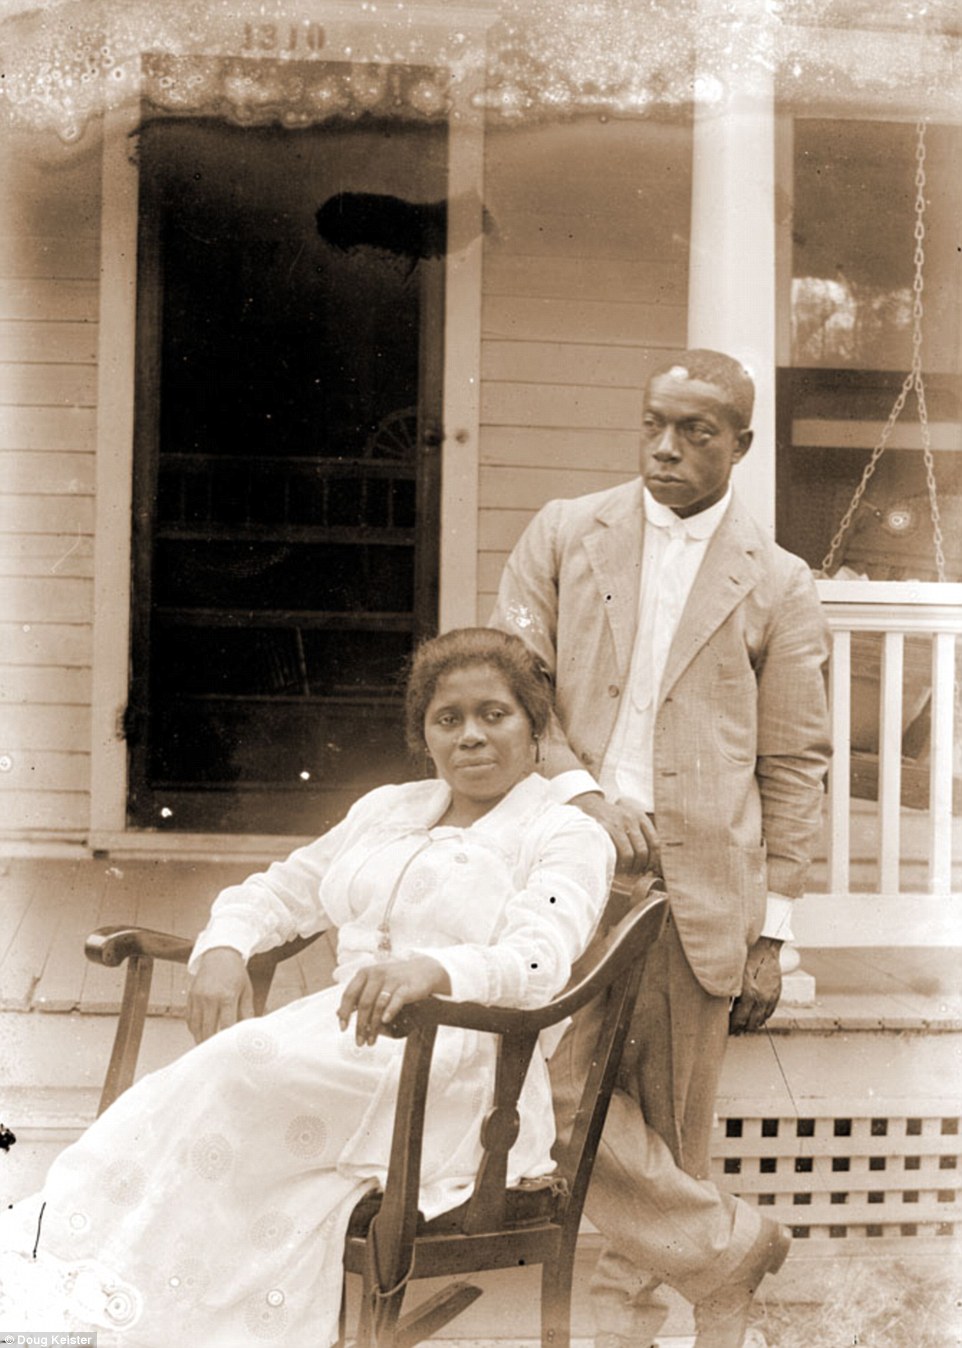 From 1910-1925 amateur photographer John Johnson (right) took hundreds of photographs of the African American and immigrant communities in Lincoln, Nebraska. Johnson married Odessa Price (left) on August 20, 1918. She was 27 and he was 39. This is believed to be their wedding portrait and someone would have helped Johnson trigger his camera's shutter. John went to Lincoln High School and was a member of the track team. He graduated in 1899 and briefly attended the University of Nebraska where he played football. He worked as a janitor at the post office and courthouse in Lincoln, but also did work as a laborer and drayman (someone who delivers beer for a brewery). Johnson and his wife died within months of each other in 1953